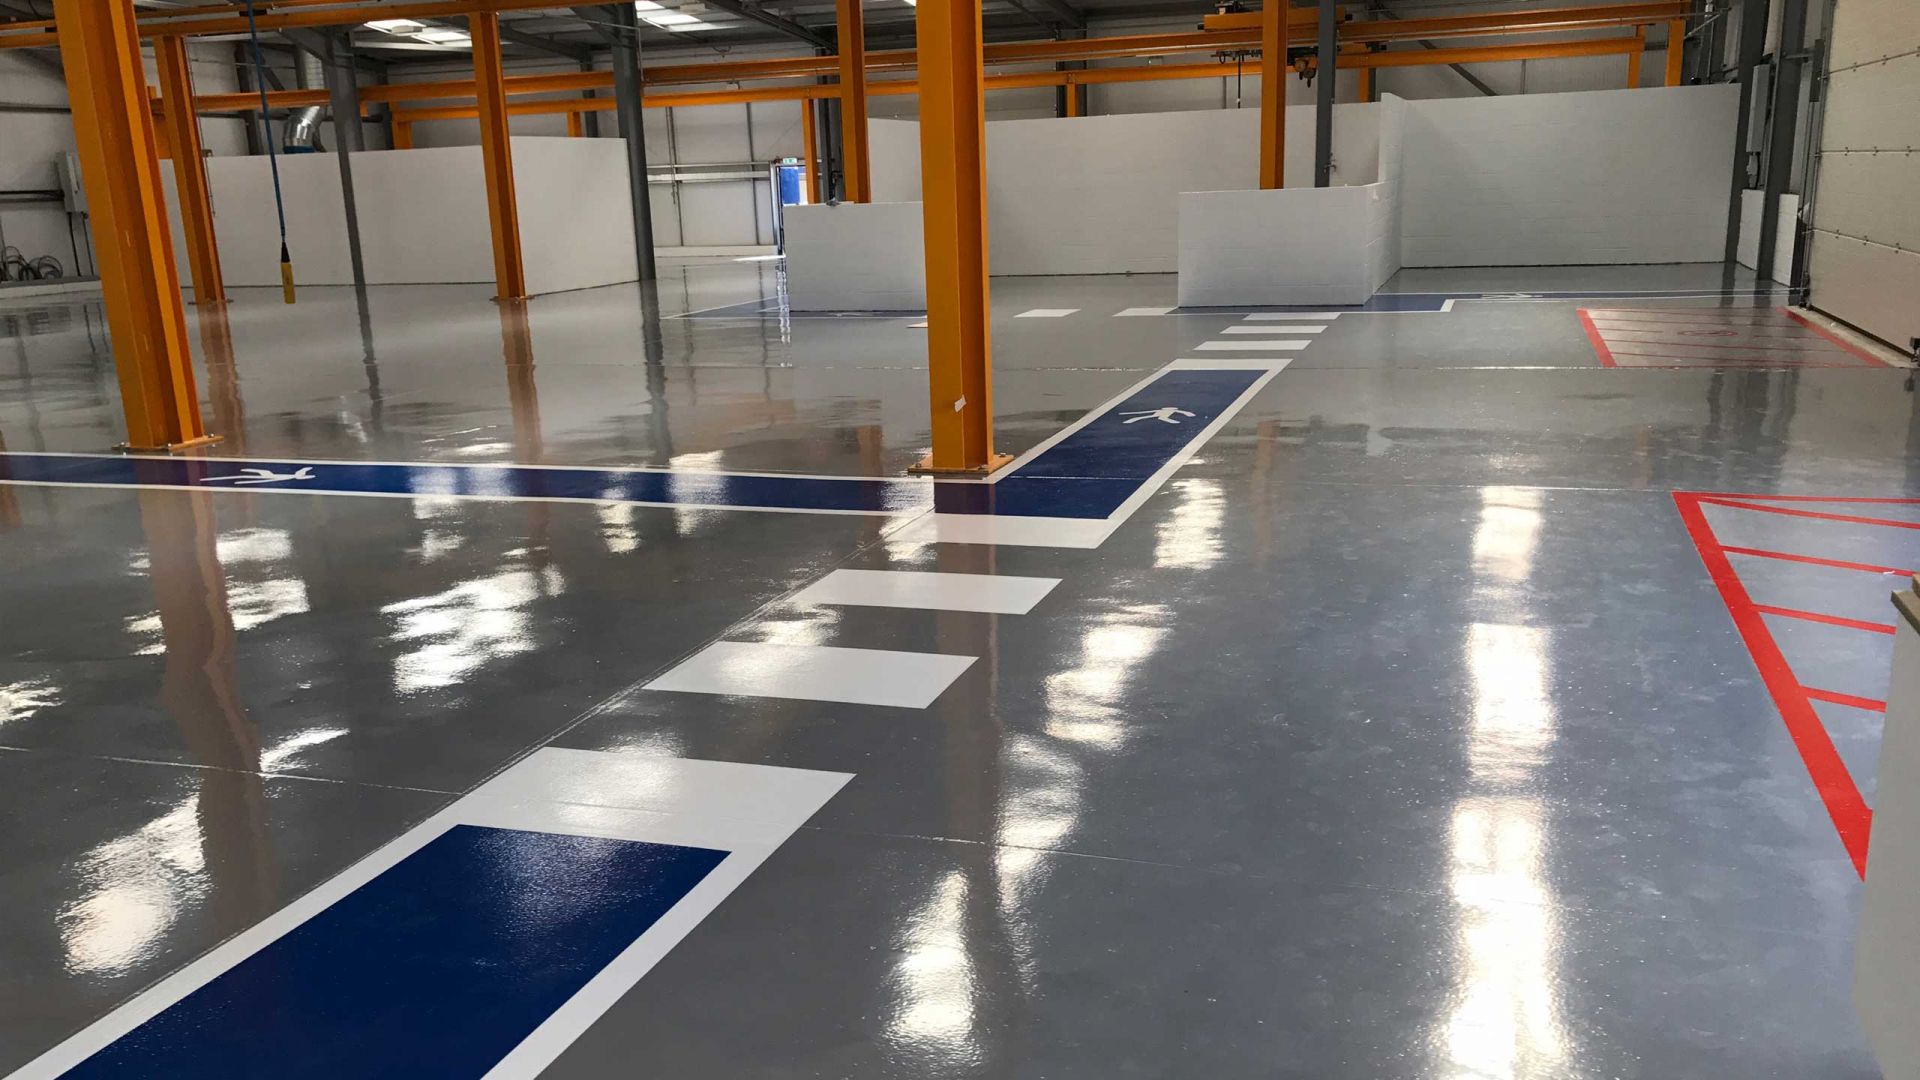 epoxy industrial flooring installation in Kent, durable polyurethane finishes for Kent warehouses, concrete sealant for floors in Kent, heavy-duty ceramic tiles available in Kent, anti-slip coating for workshop floors in Kent, customised flooring solutions for Kent businesses, chemical-resistant flooring for Kent industries, hygienic flooring for Kent food processing plants, bespoke floor markings for Kent facilities, professional floor repair services in Kent, dustproofing treatments for Kent floors, decorative and sustainable flooring in Kent, high-performance coatings for floors in Kent, comprehensive flooring installation in Kent, ongoing floor maintenance in Kent